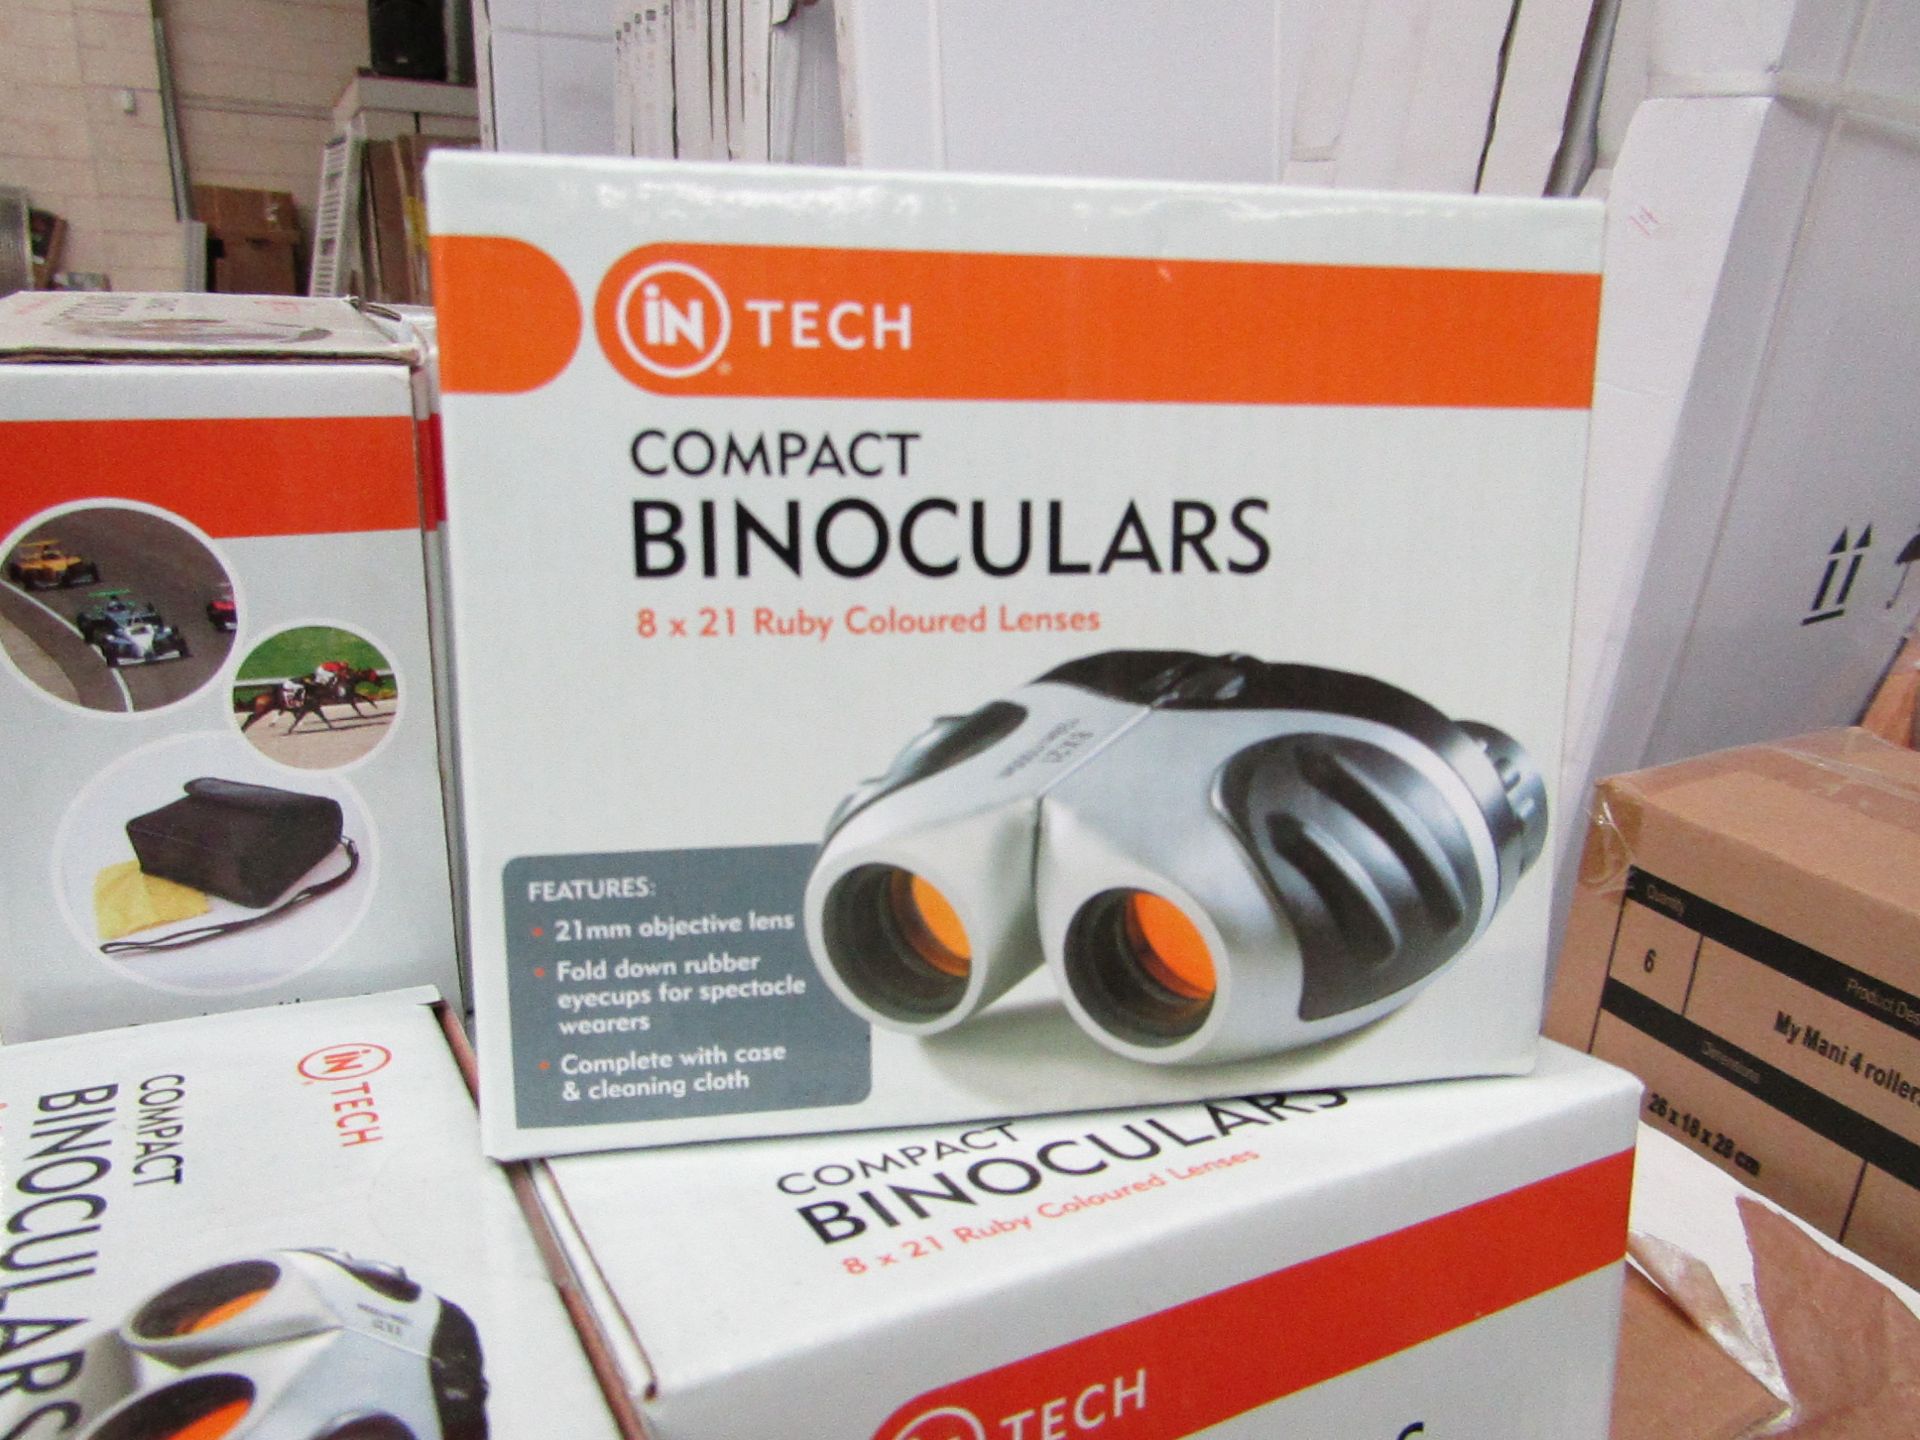 In Tech - Compact Binoculars - Ruby Coloured Lenses - New and boxed. - RRP CIRCA £34.99.